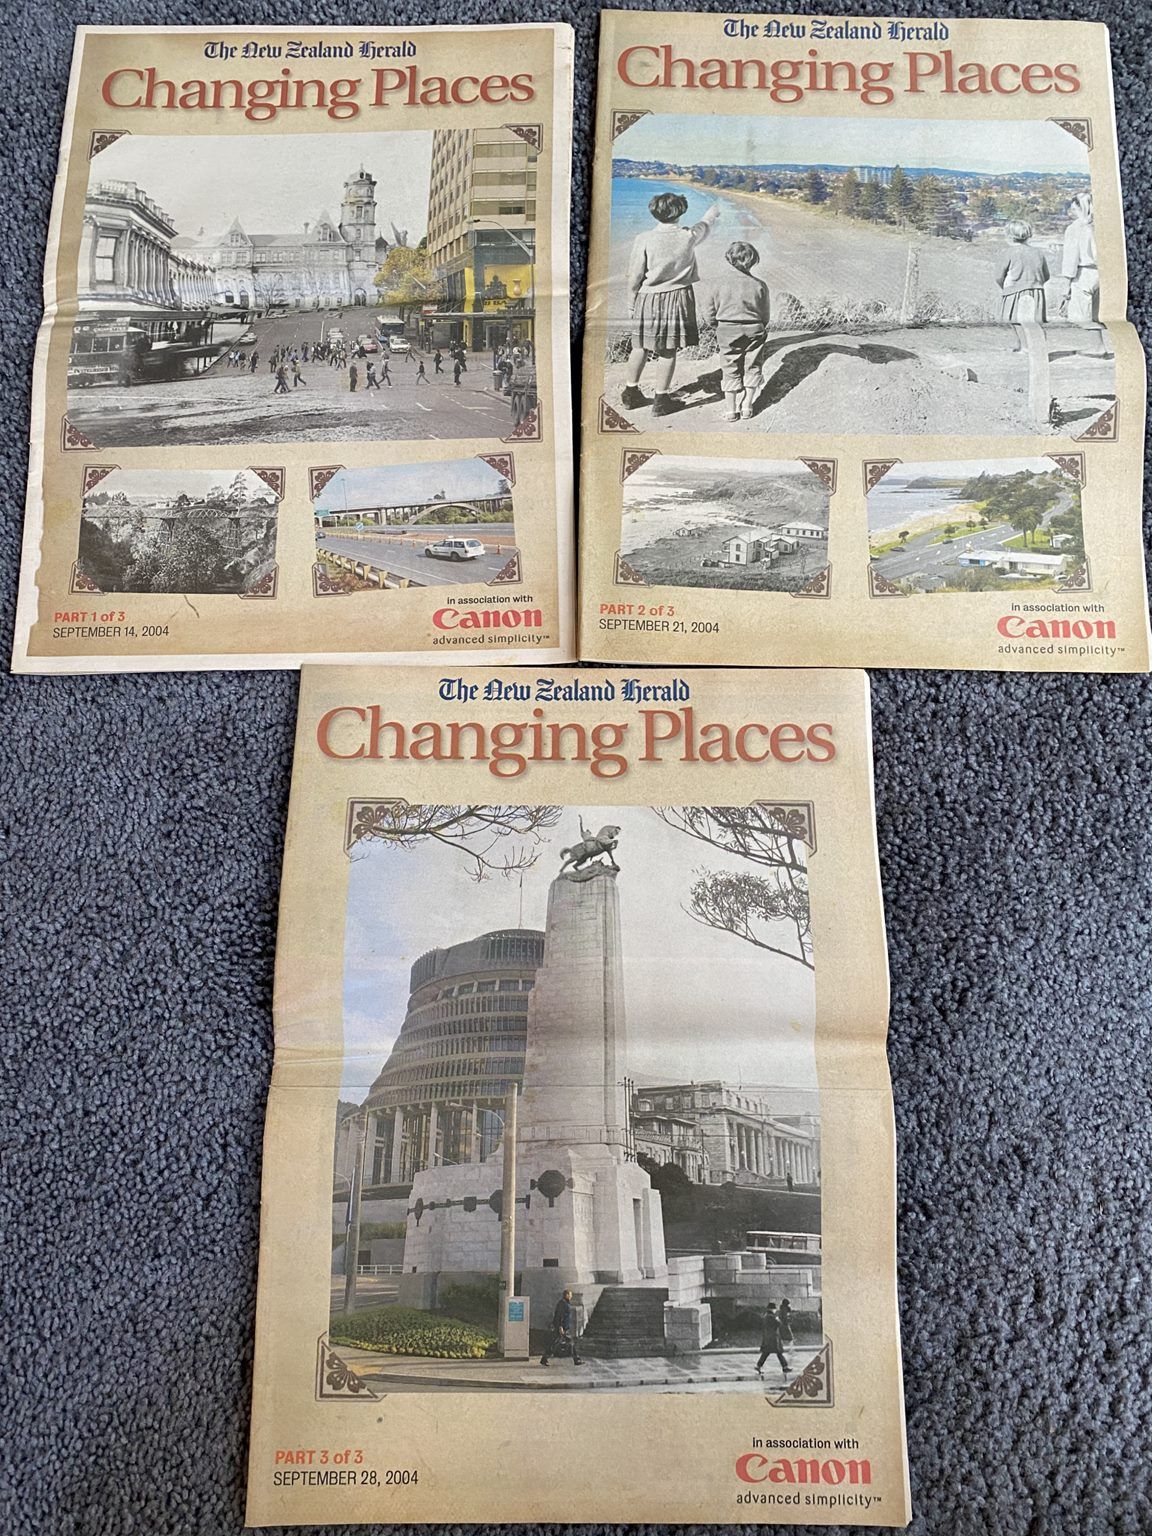 OLD NEWSPAPER: New Zealand Herald - Changing Places Special 2004